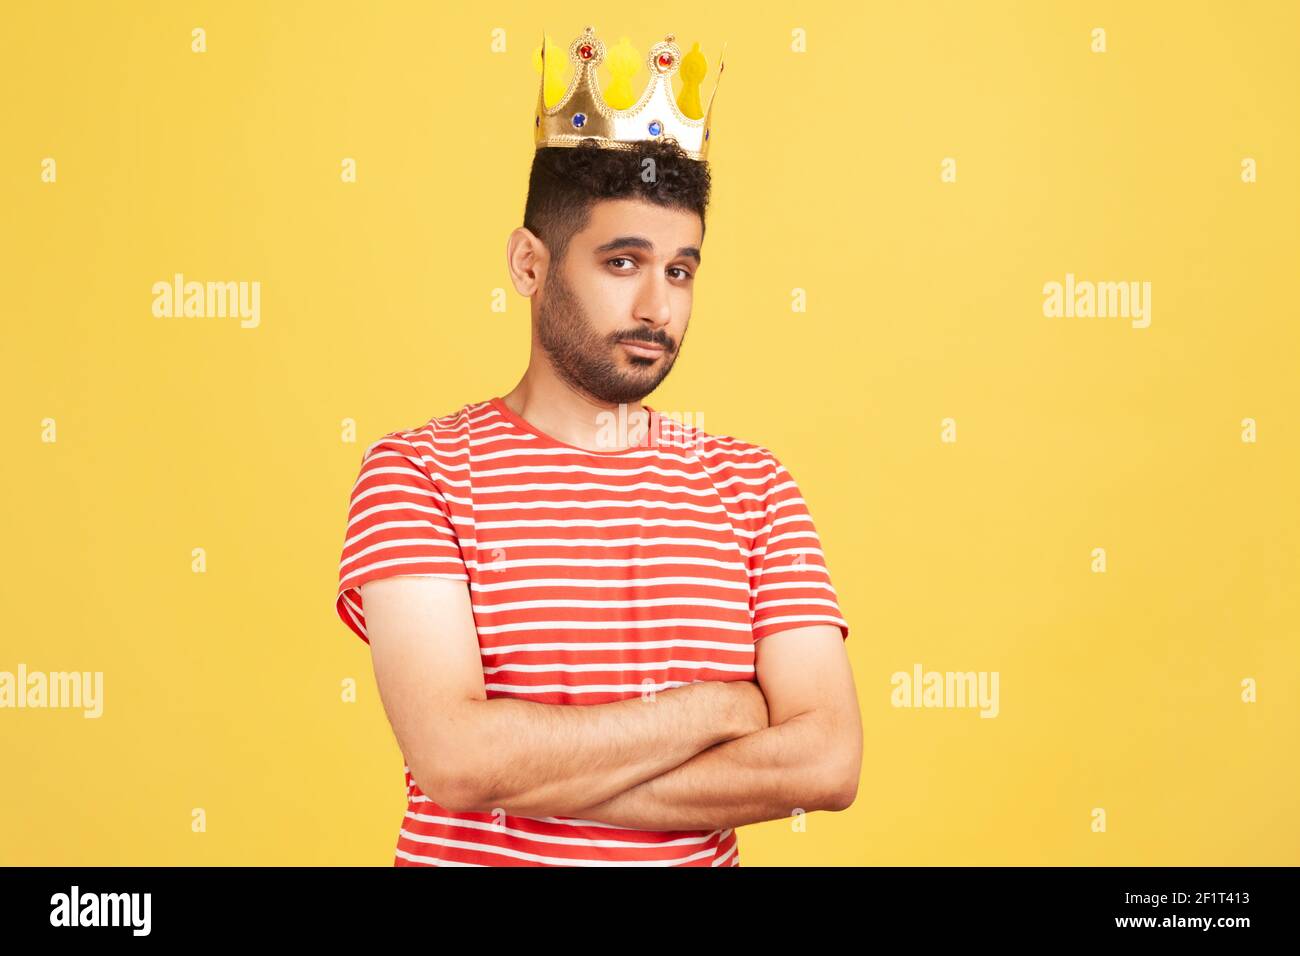 Arrogant selfish bearded man in striped t-shirt egoistically looking at camera, posing with crown on head, pretending to be king, privileged status. I Stock Photo